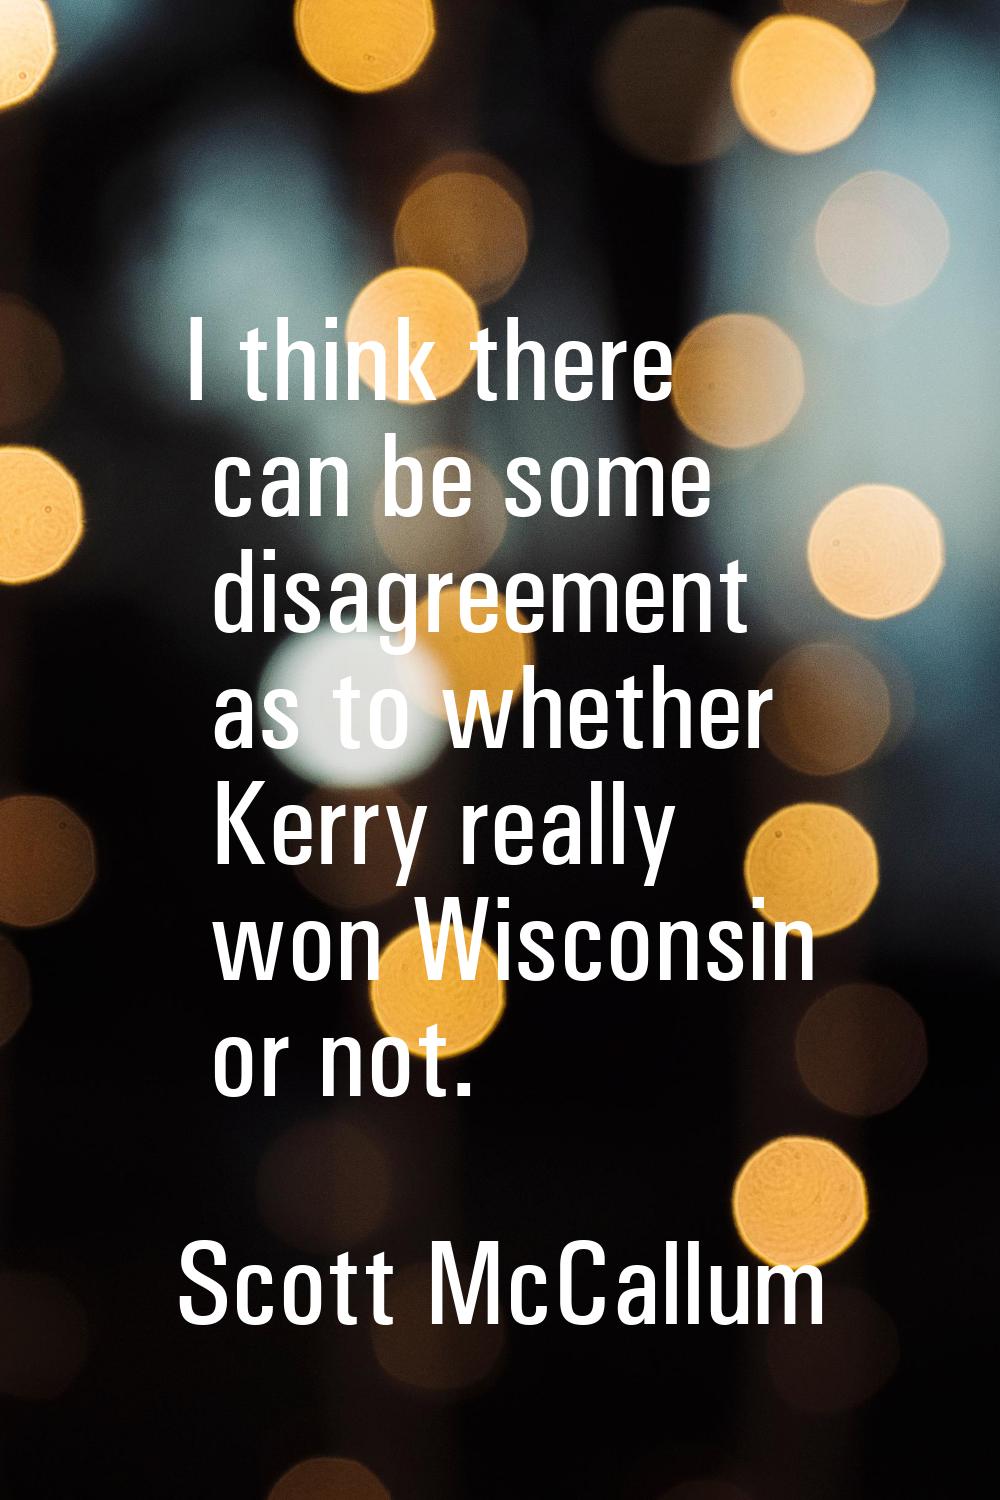 I think there can be some disagreement as to whether Kerry really won Wisconsin or not.